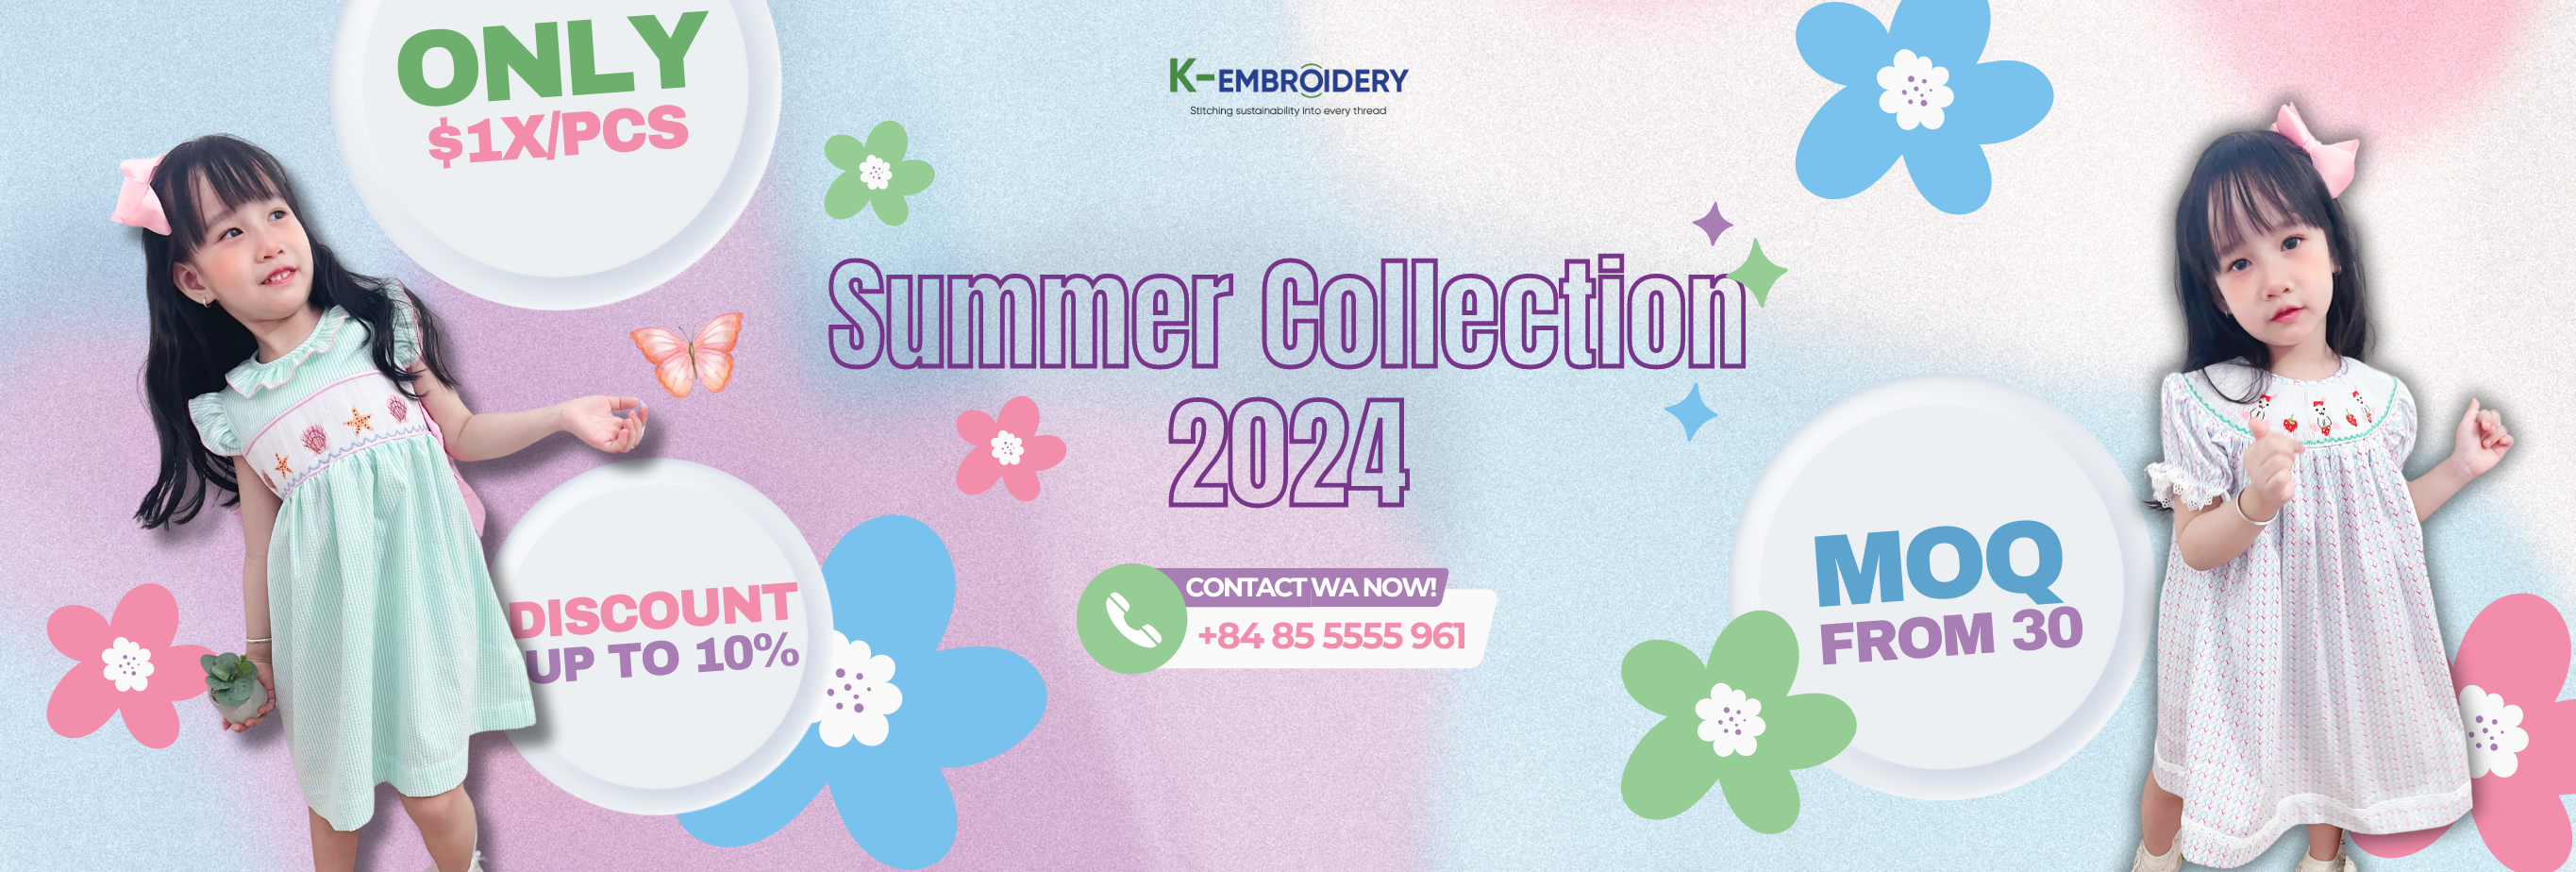 summer-collection-banner